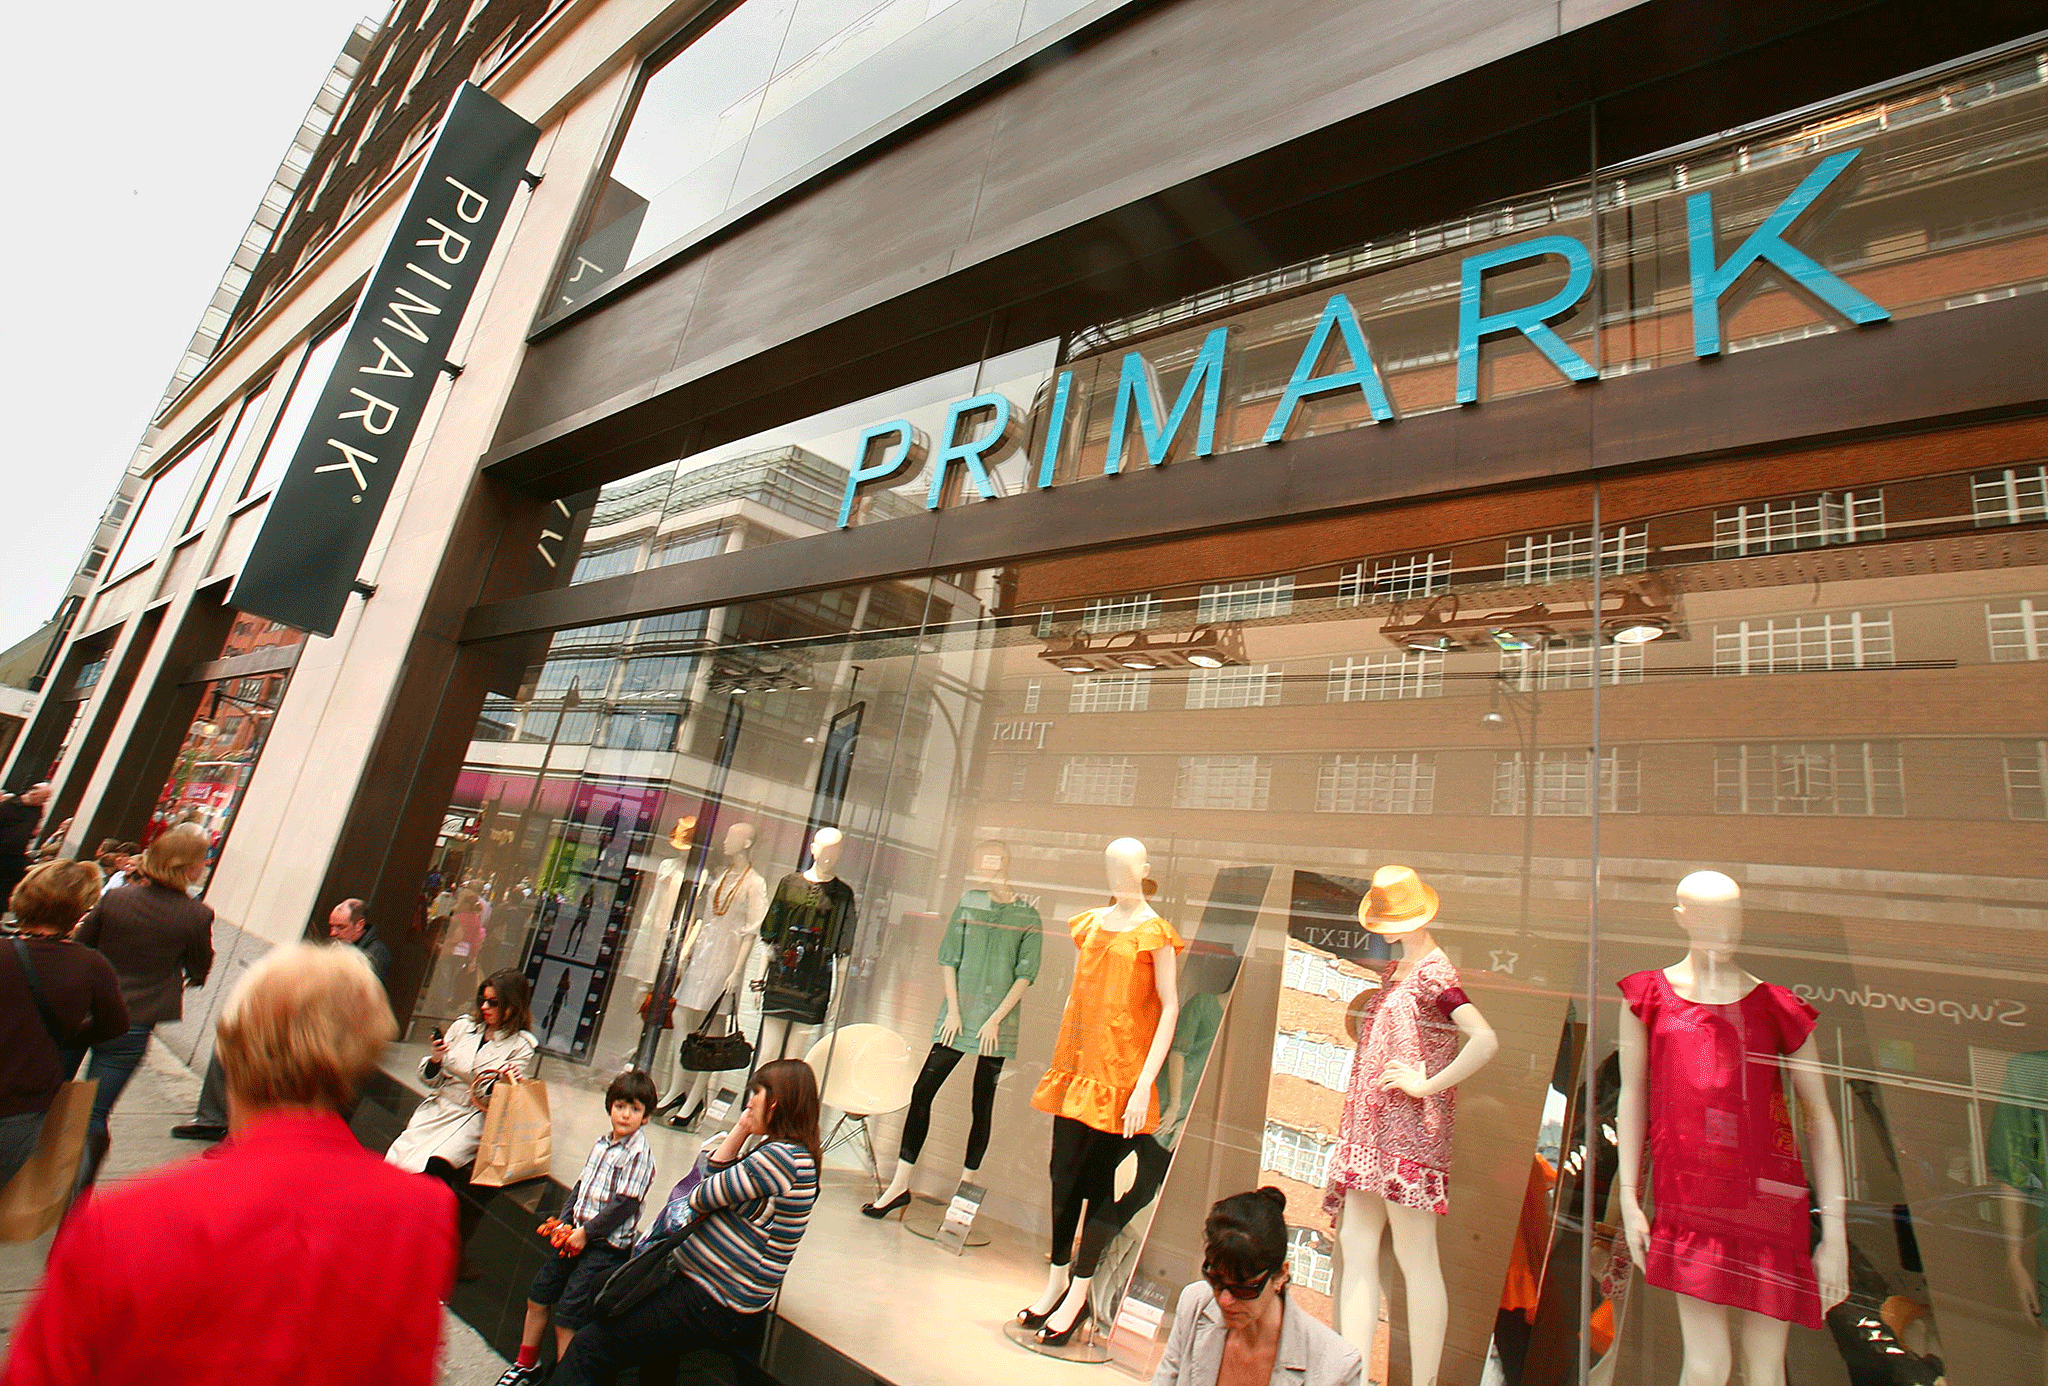 Primark blames poor weather for a fall in profits